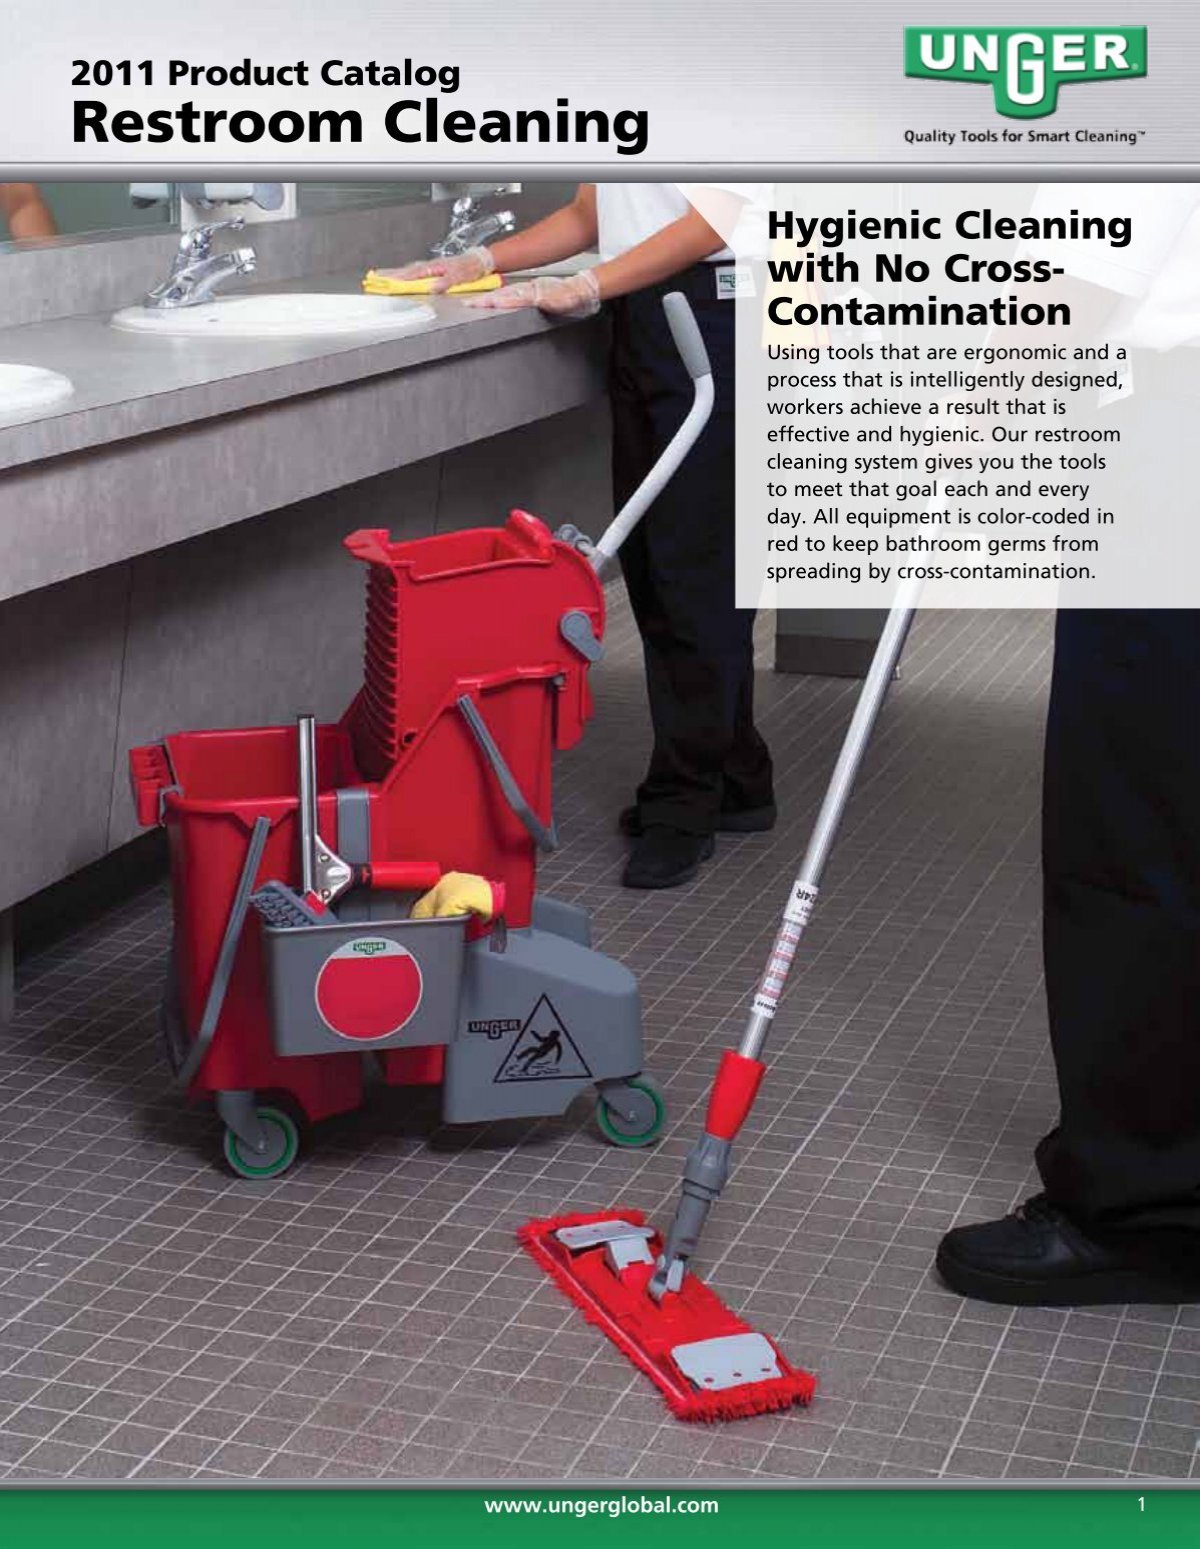 Restroom Cleaning Kits  Ergonomic Commercial Cleaning Tools - Unger